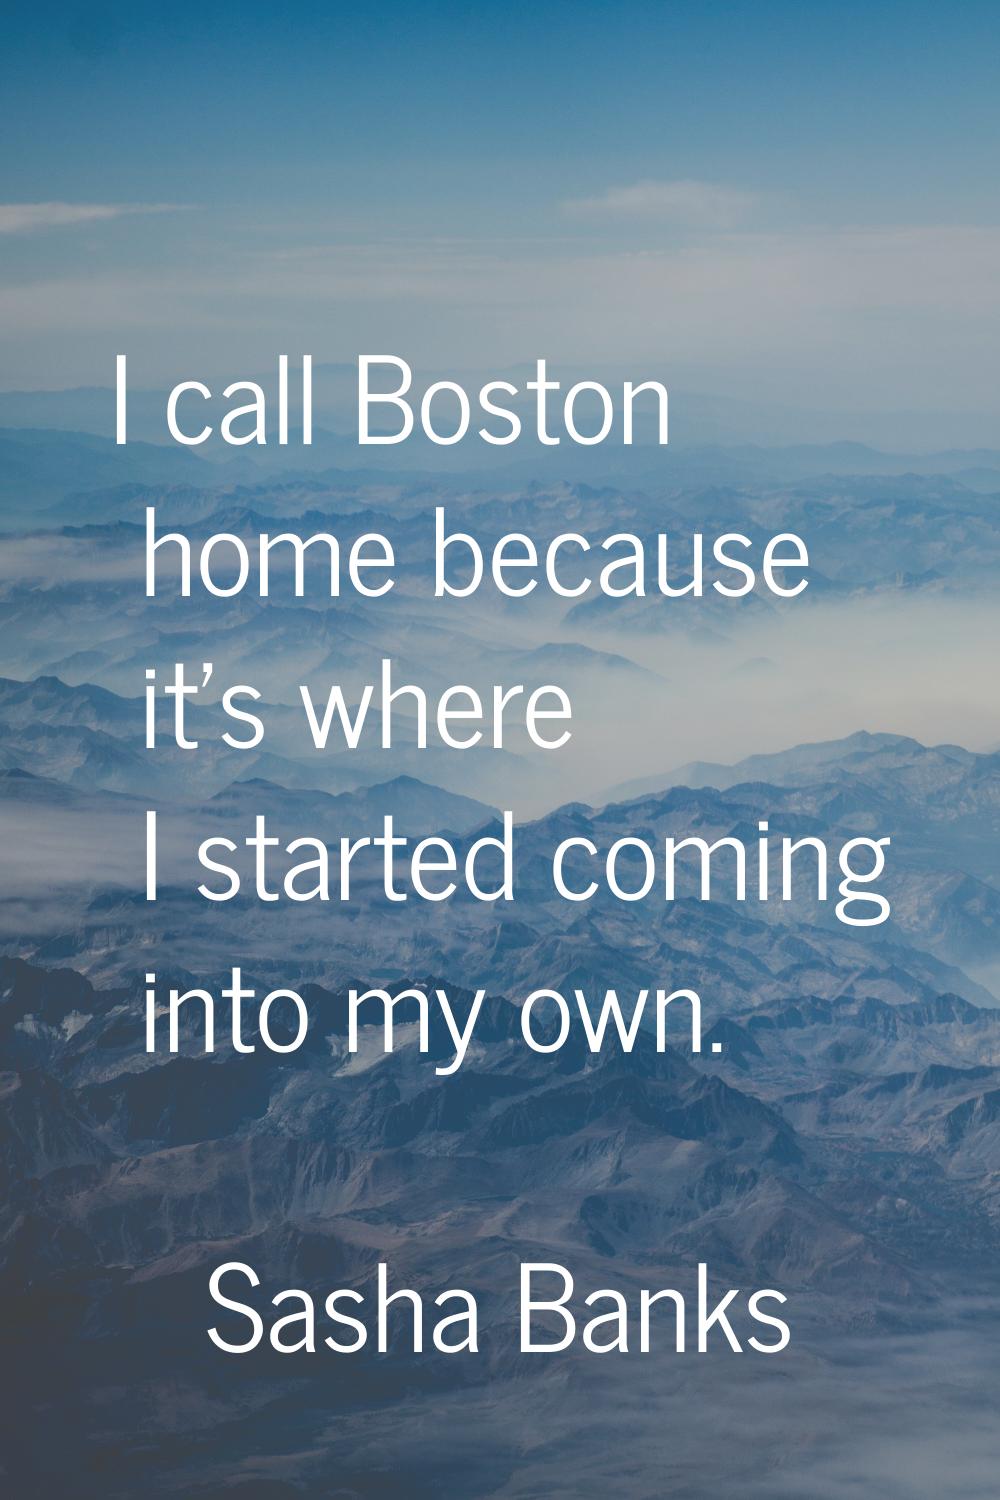 I call Boston home because it's where I started coming into my own.